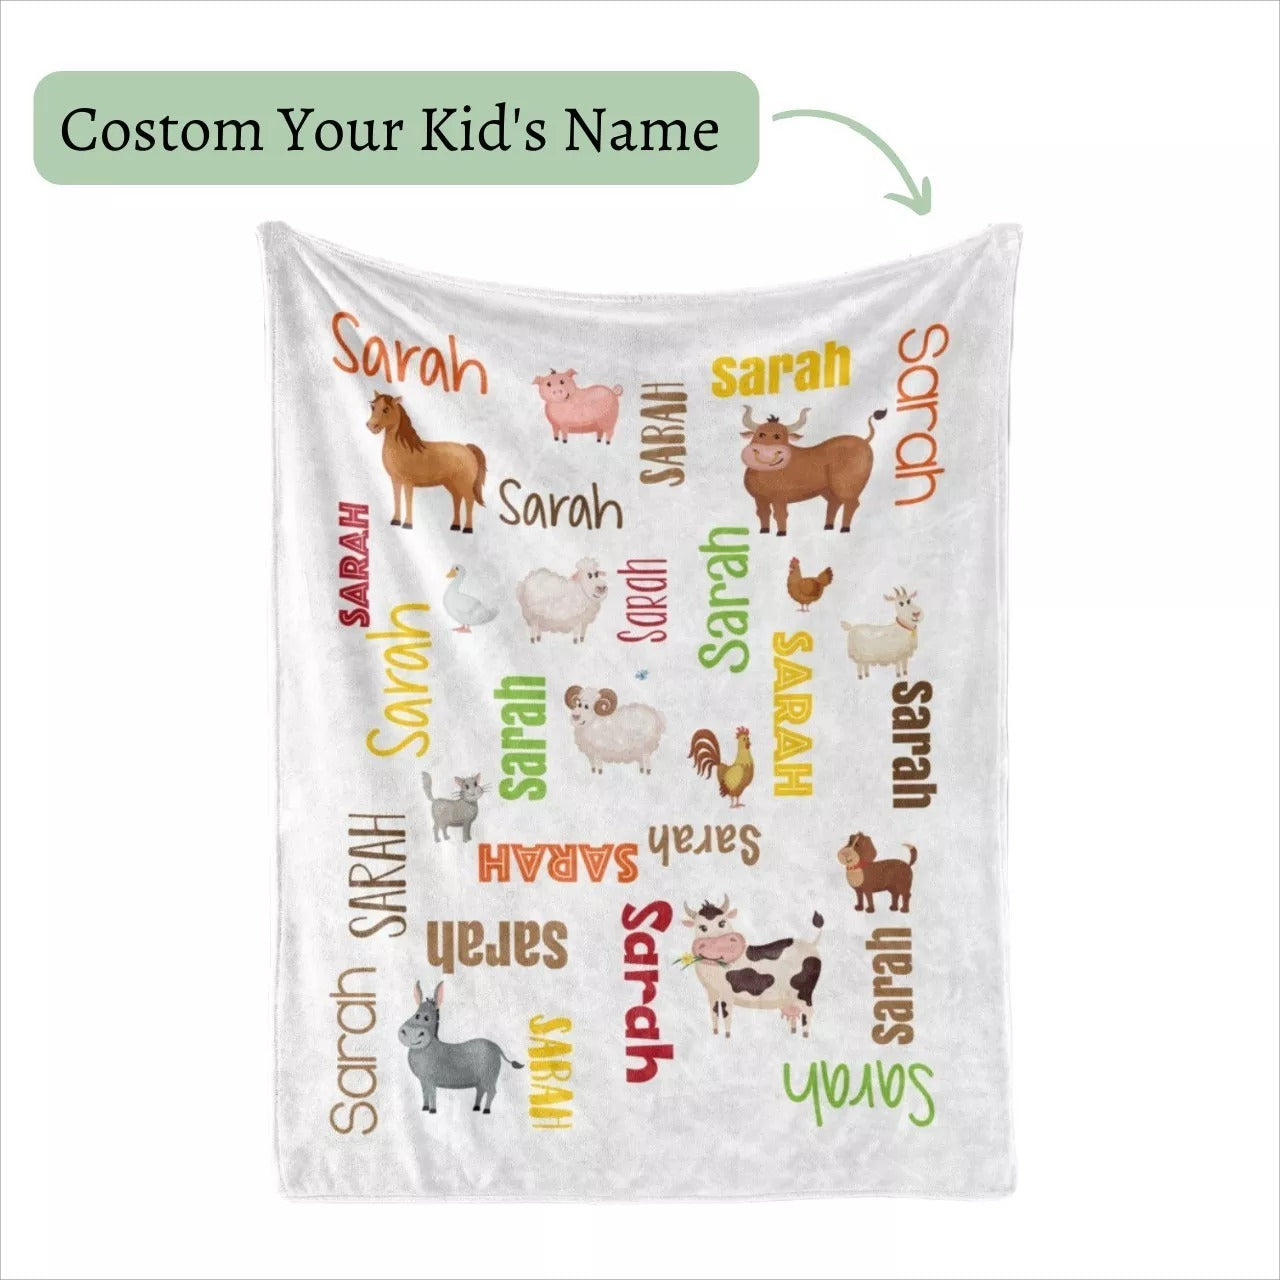 Custom With Name Animal Farm Baby Blanket/ Cute Animal Horse Sheep Rooster Small Blanket For Newborn Baby/ Kids Blanket